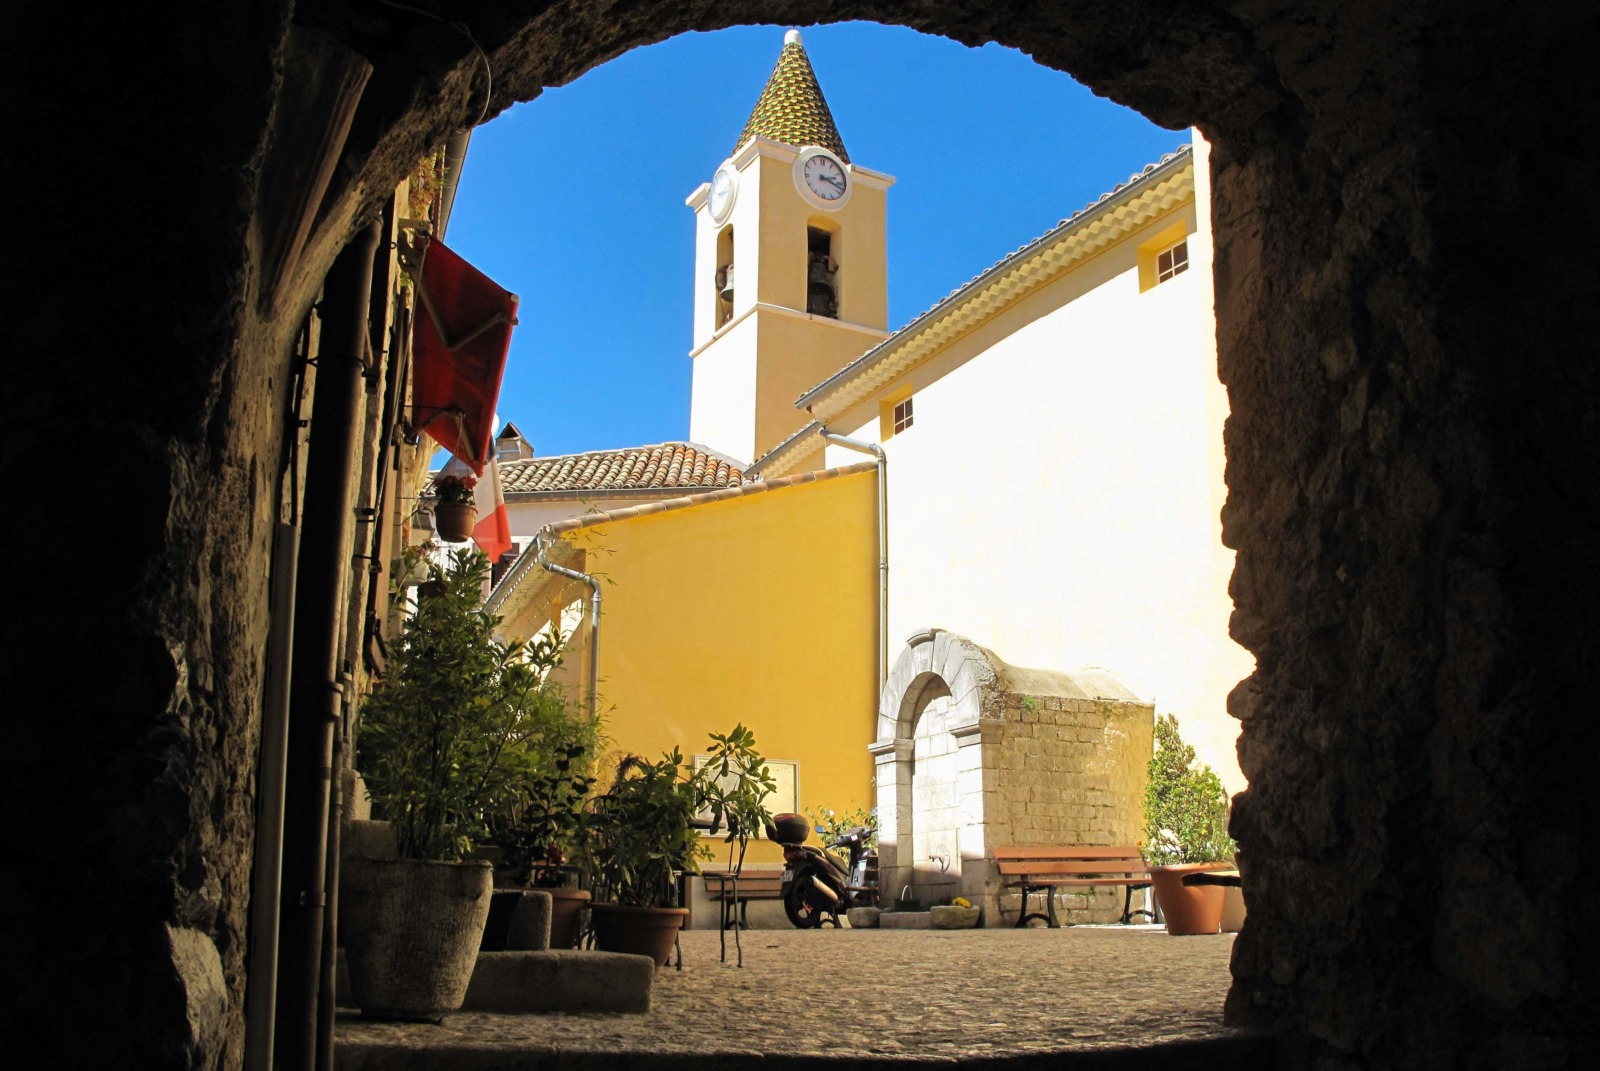 Under an old arch in the village. Photo: Tangopaso (Public Domain)